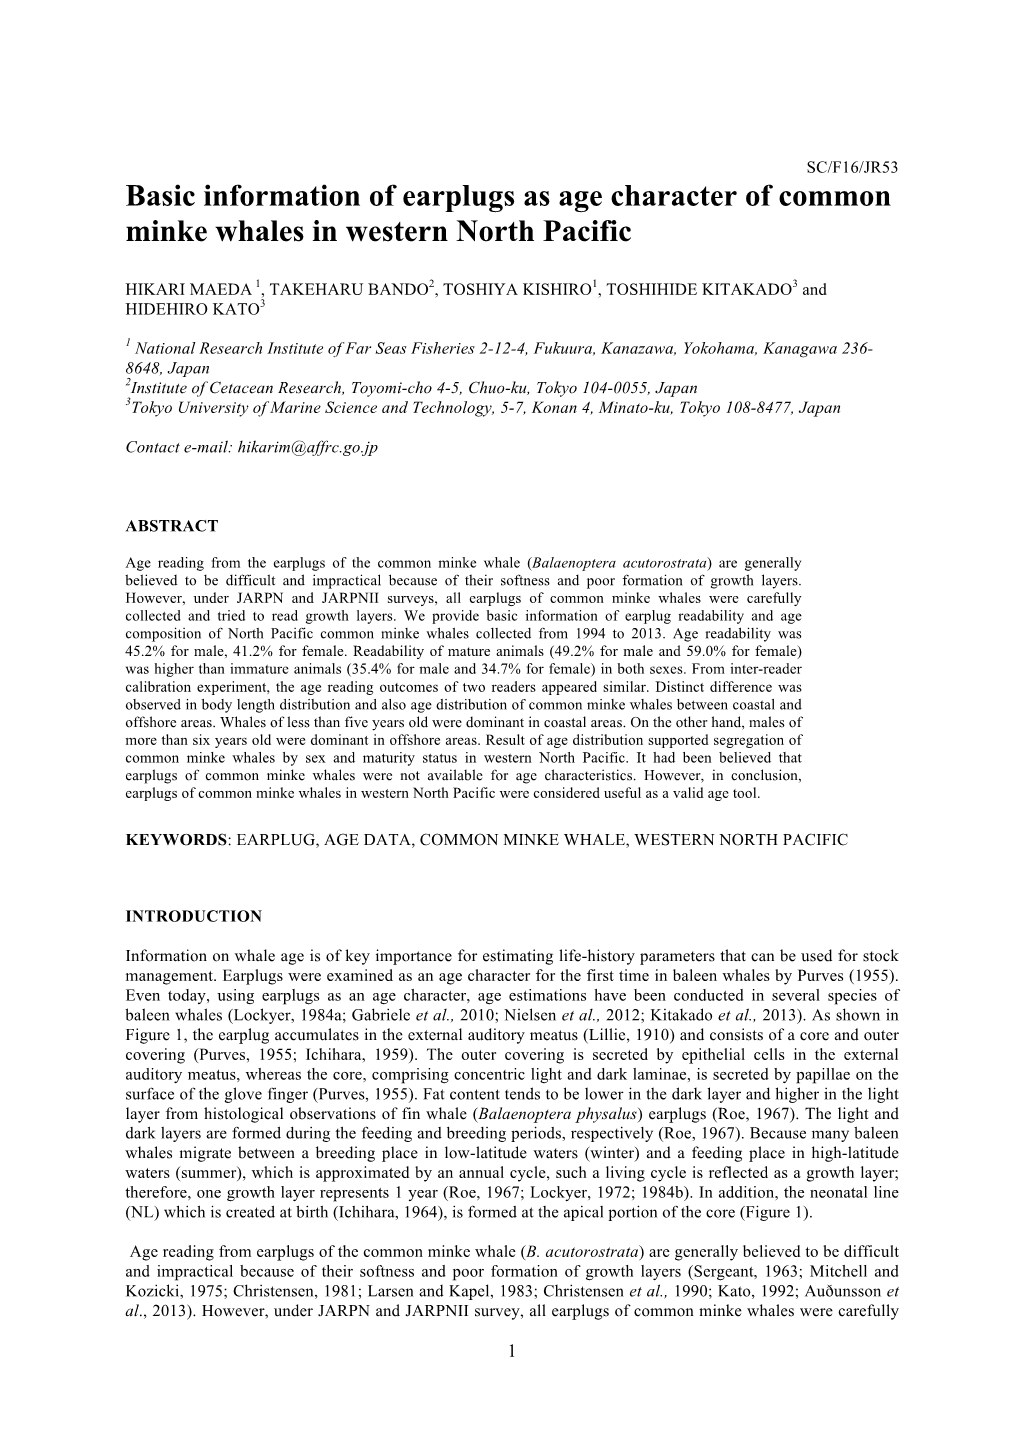 Basic Information of Earplugs As Age Character of Common Minke Whales in Western North Pacific